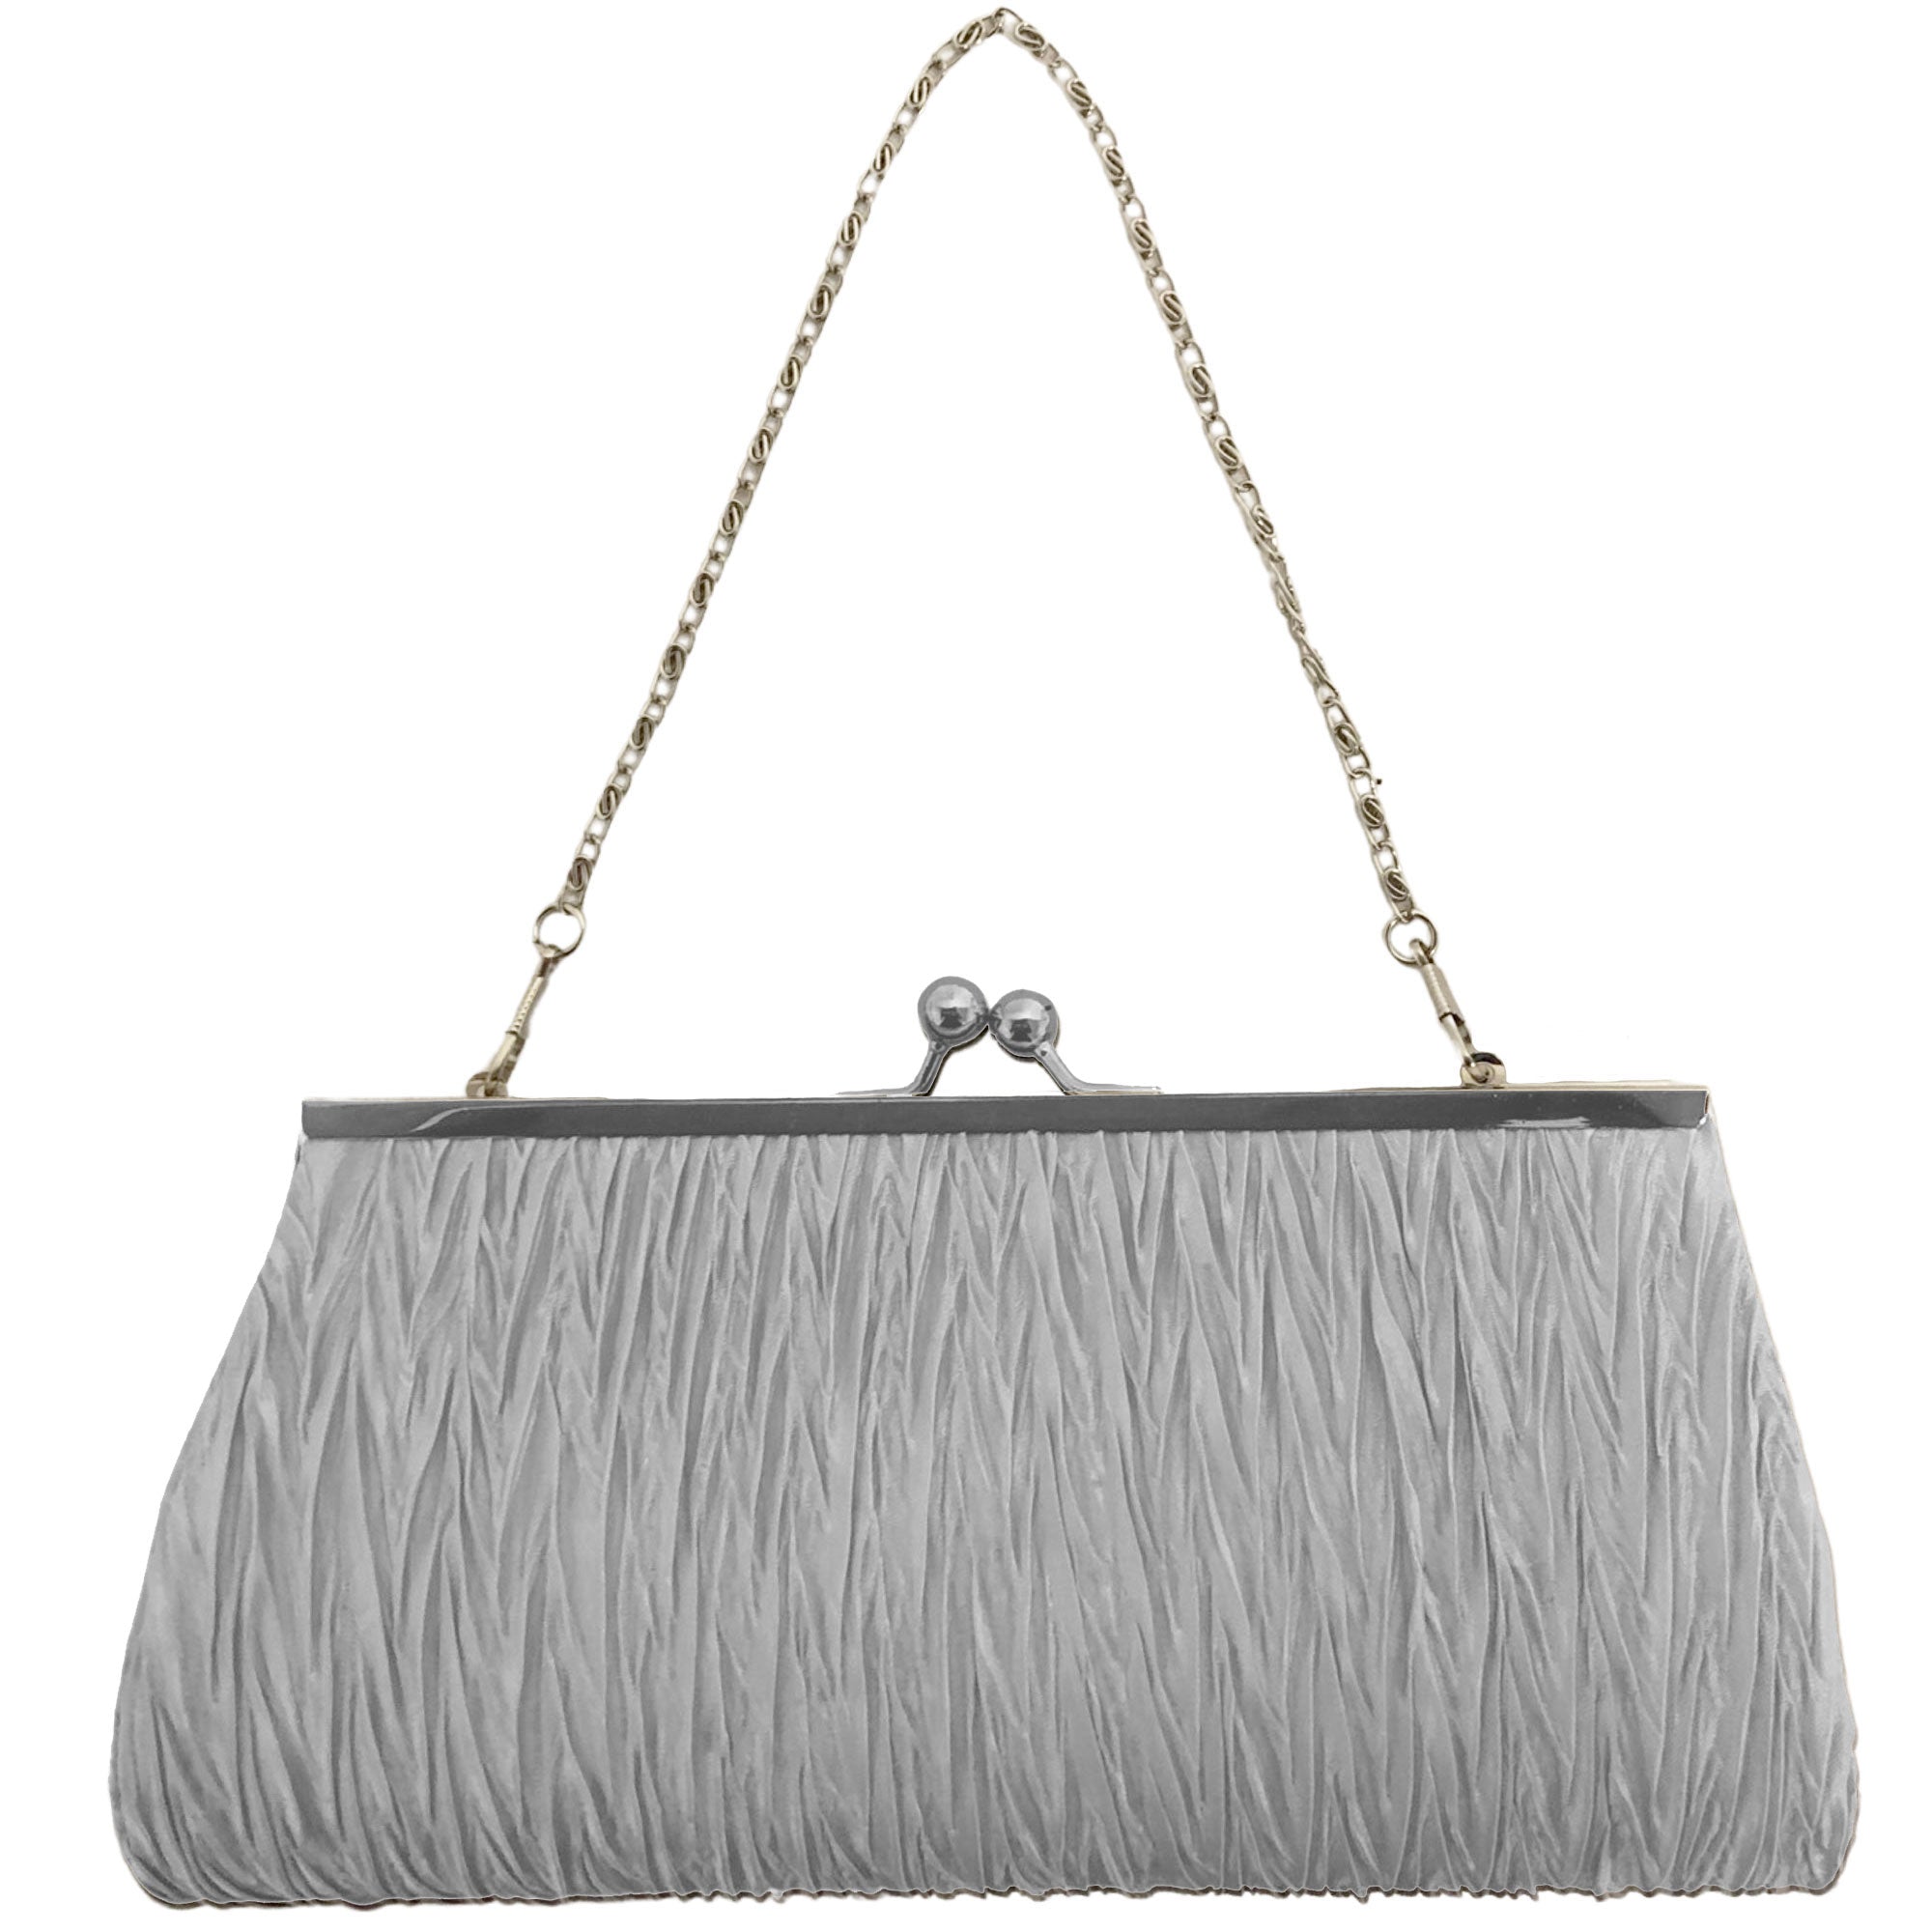 CLEARANCE PLEATED EVENING BAG IN SILVER (CASE OF 48 - $1.50 / PIECE)  Wholesale Silver Pleated Evening Bag SKU: EB1020-PLEATED-SIL-48